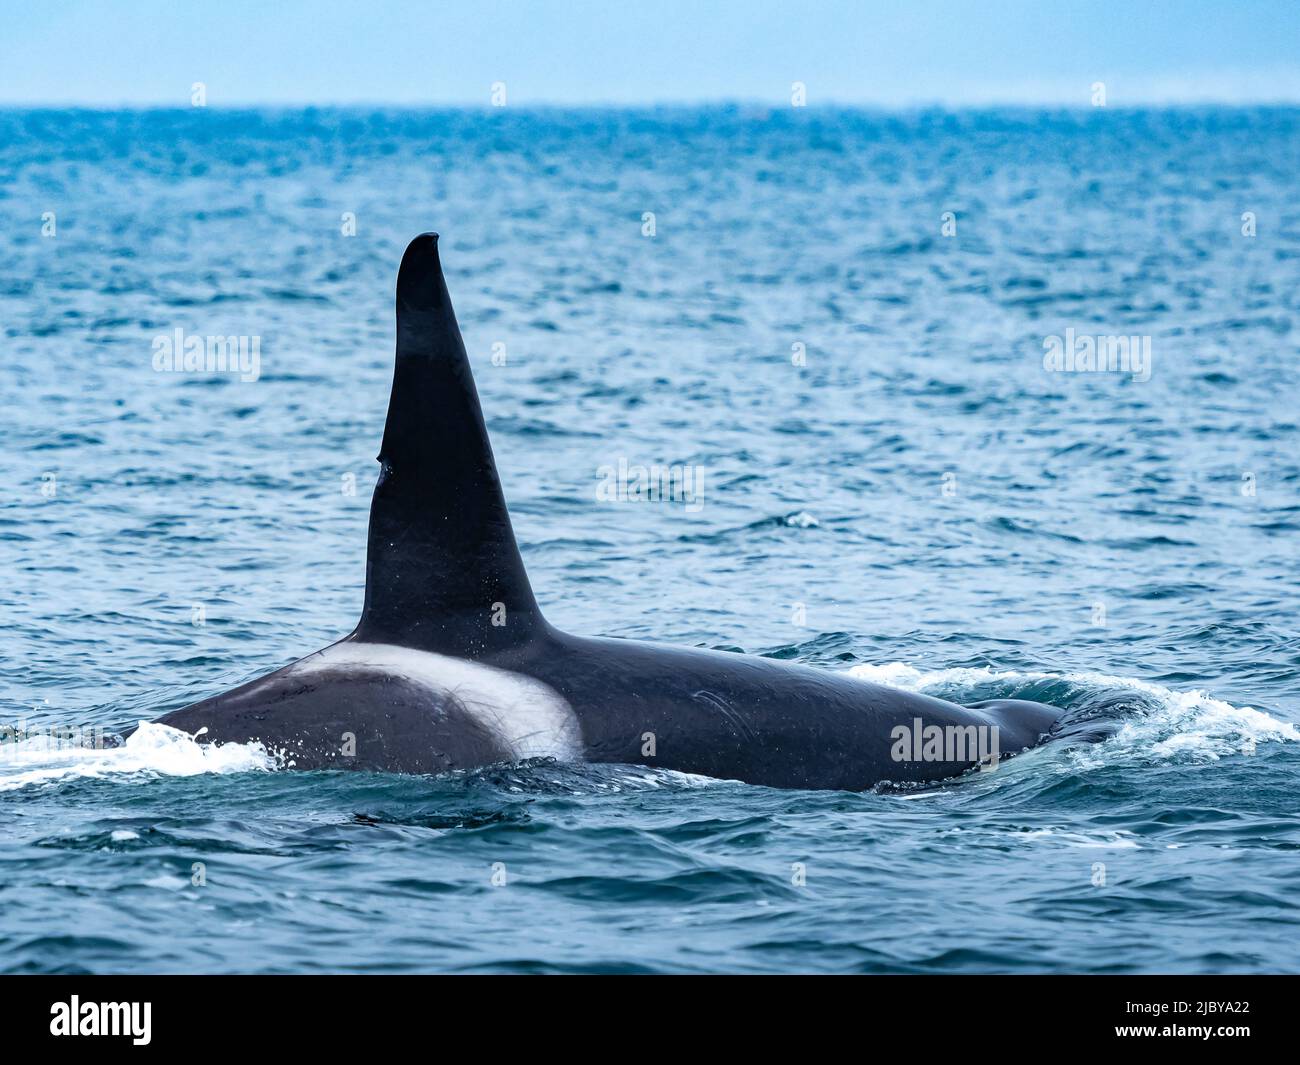 Tall dorsal fin of male Transiant Killer Whale (Orca orcinus) in Monterey Bay, Monterey Bay National Marine Refuge, California Stock Photo